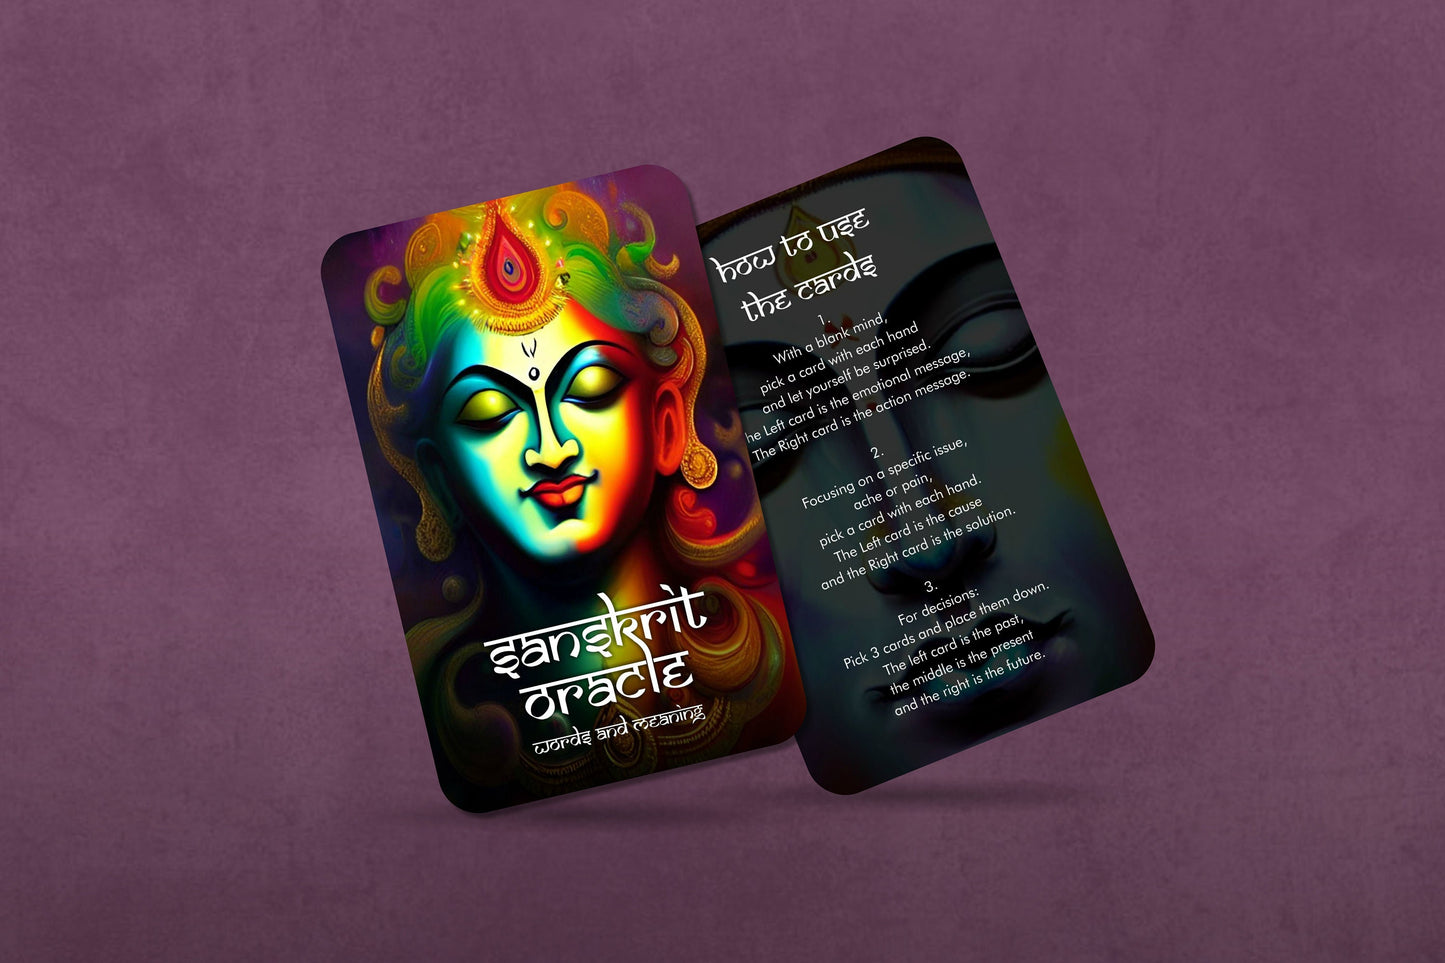 Sanskrit Oracle - Words and Meaning